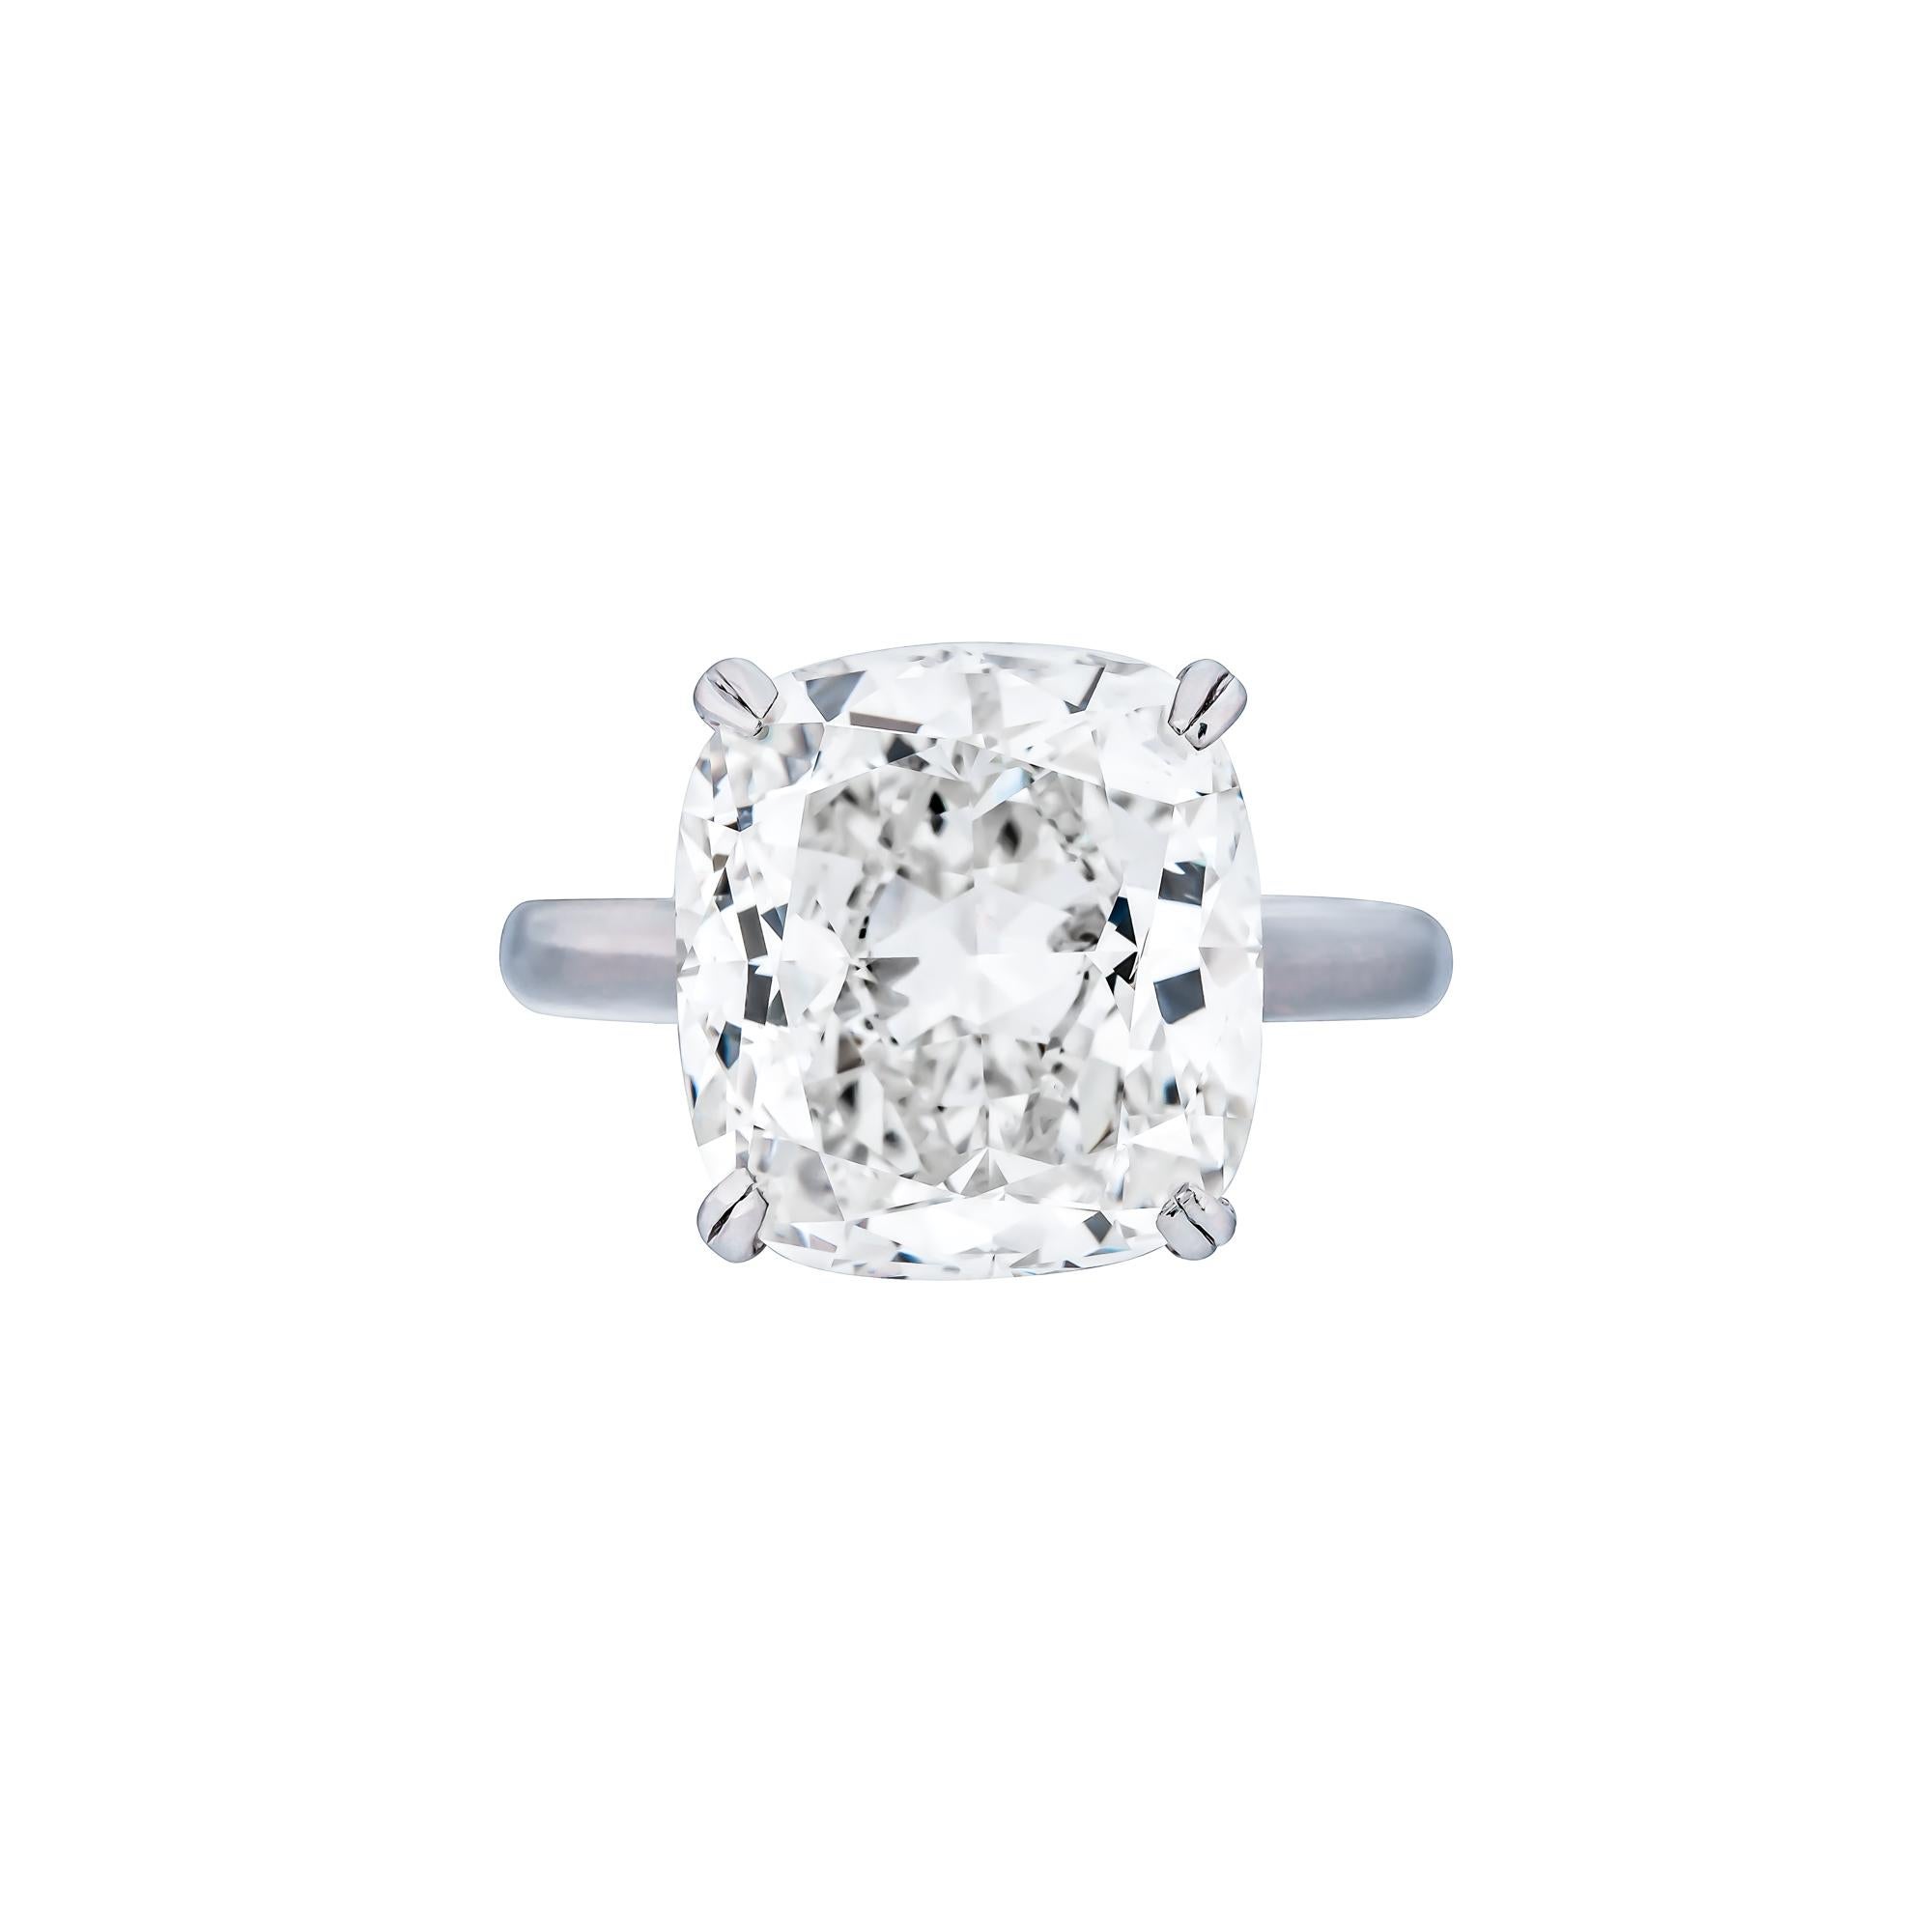 This extraordinary GIA Certified 10.01 Carat H/VS2 Cushion Cut Diamond. measurements 13.45 x 12.36 x 7.53 mm GIA certificate number 2191659168 is set into a hand made platinum mounting designed by Shreve, Crump & Low. circa 2019